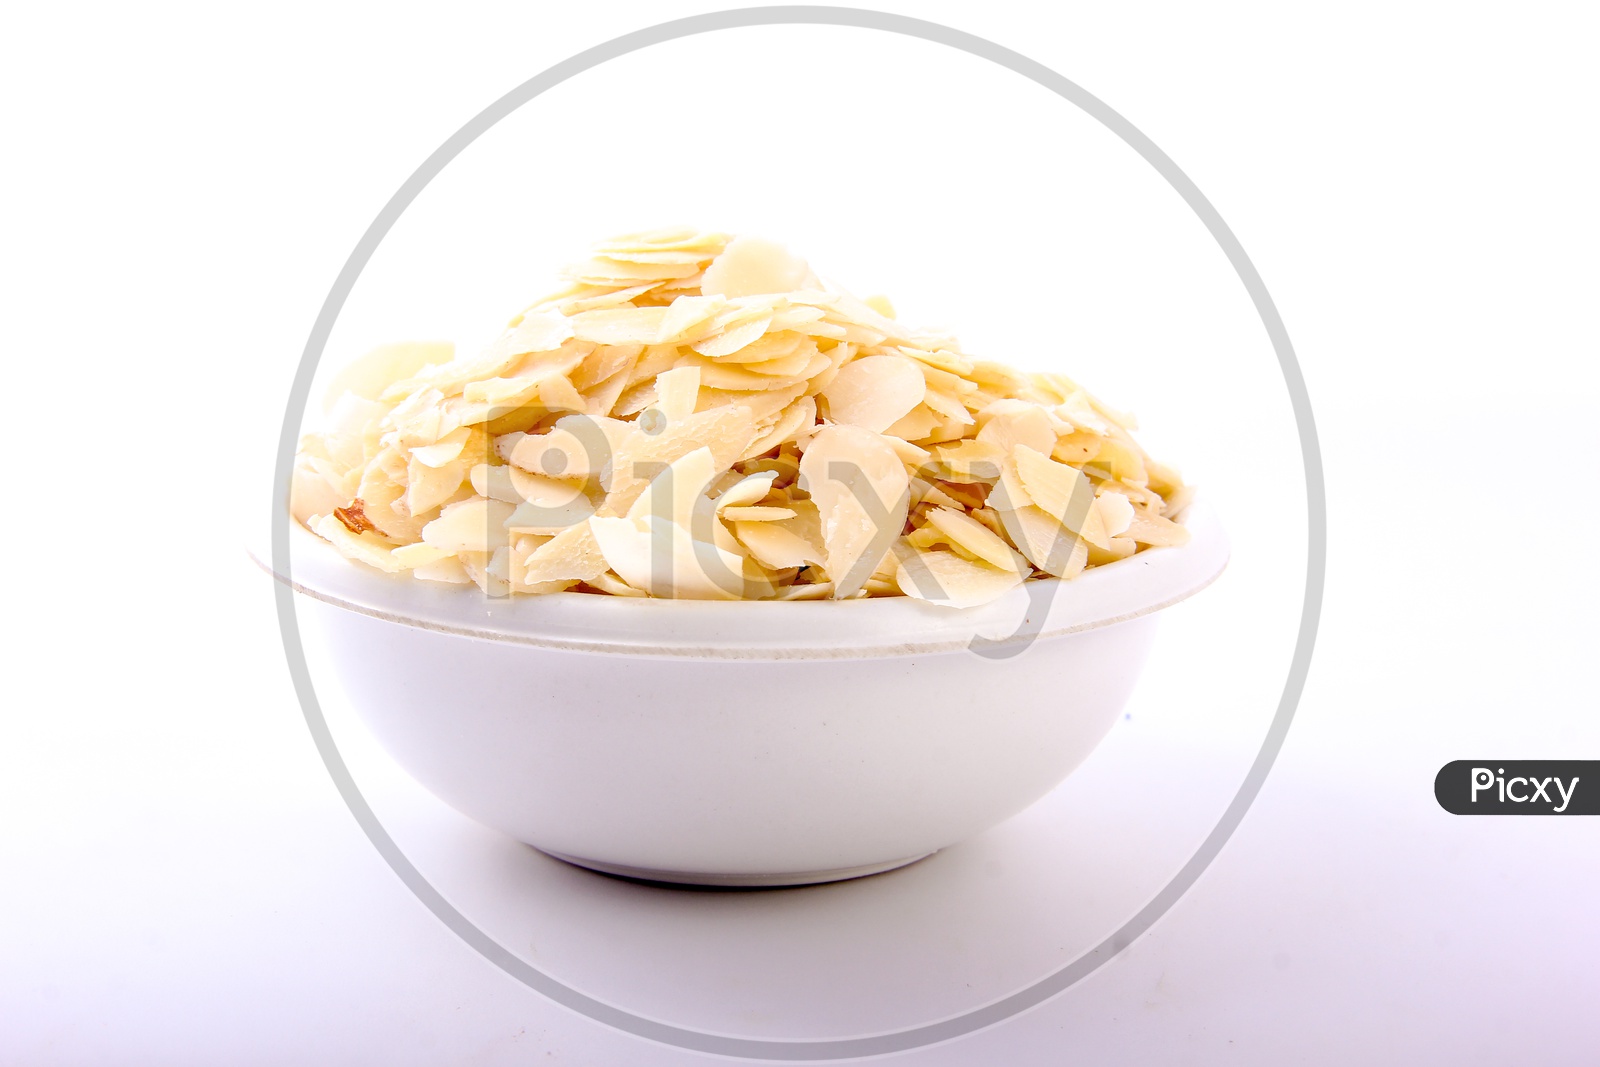 Almond / Badam Flakes in a Bowl On an Isolated White Background